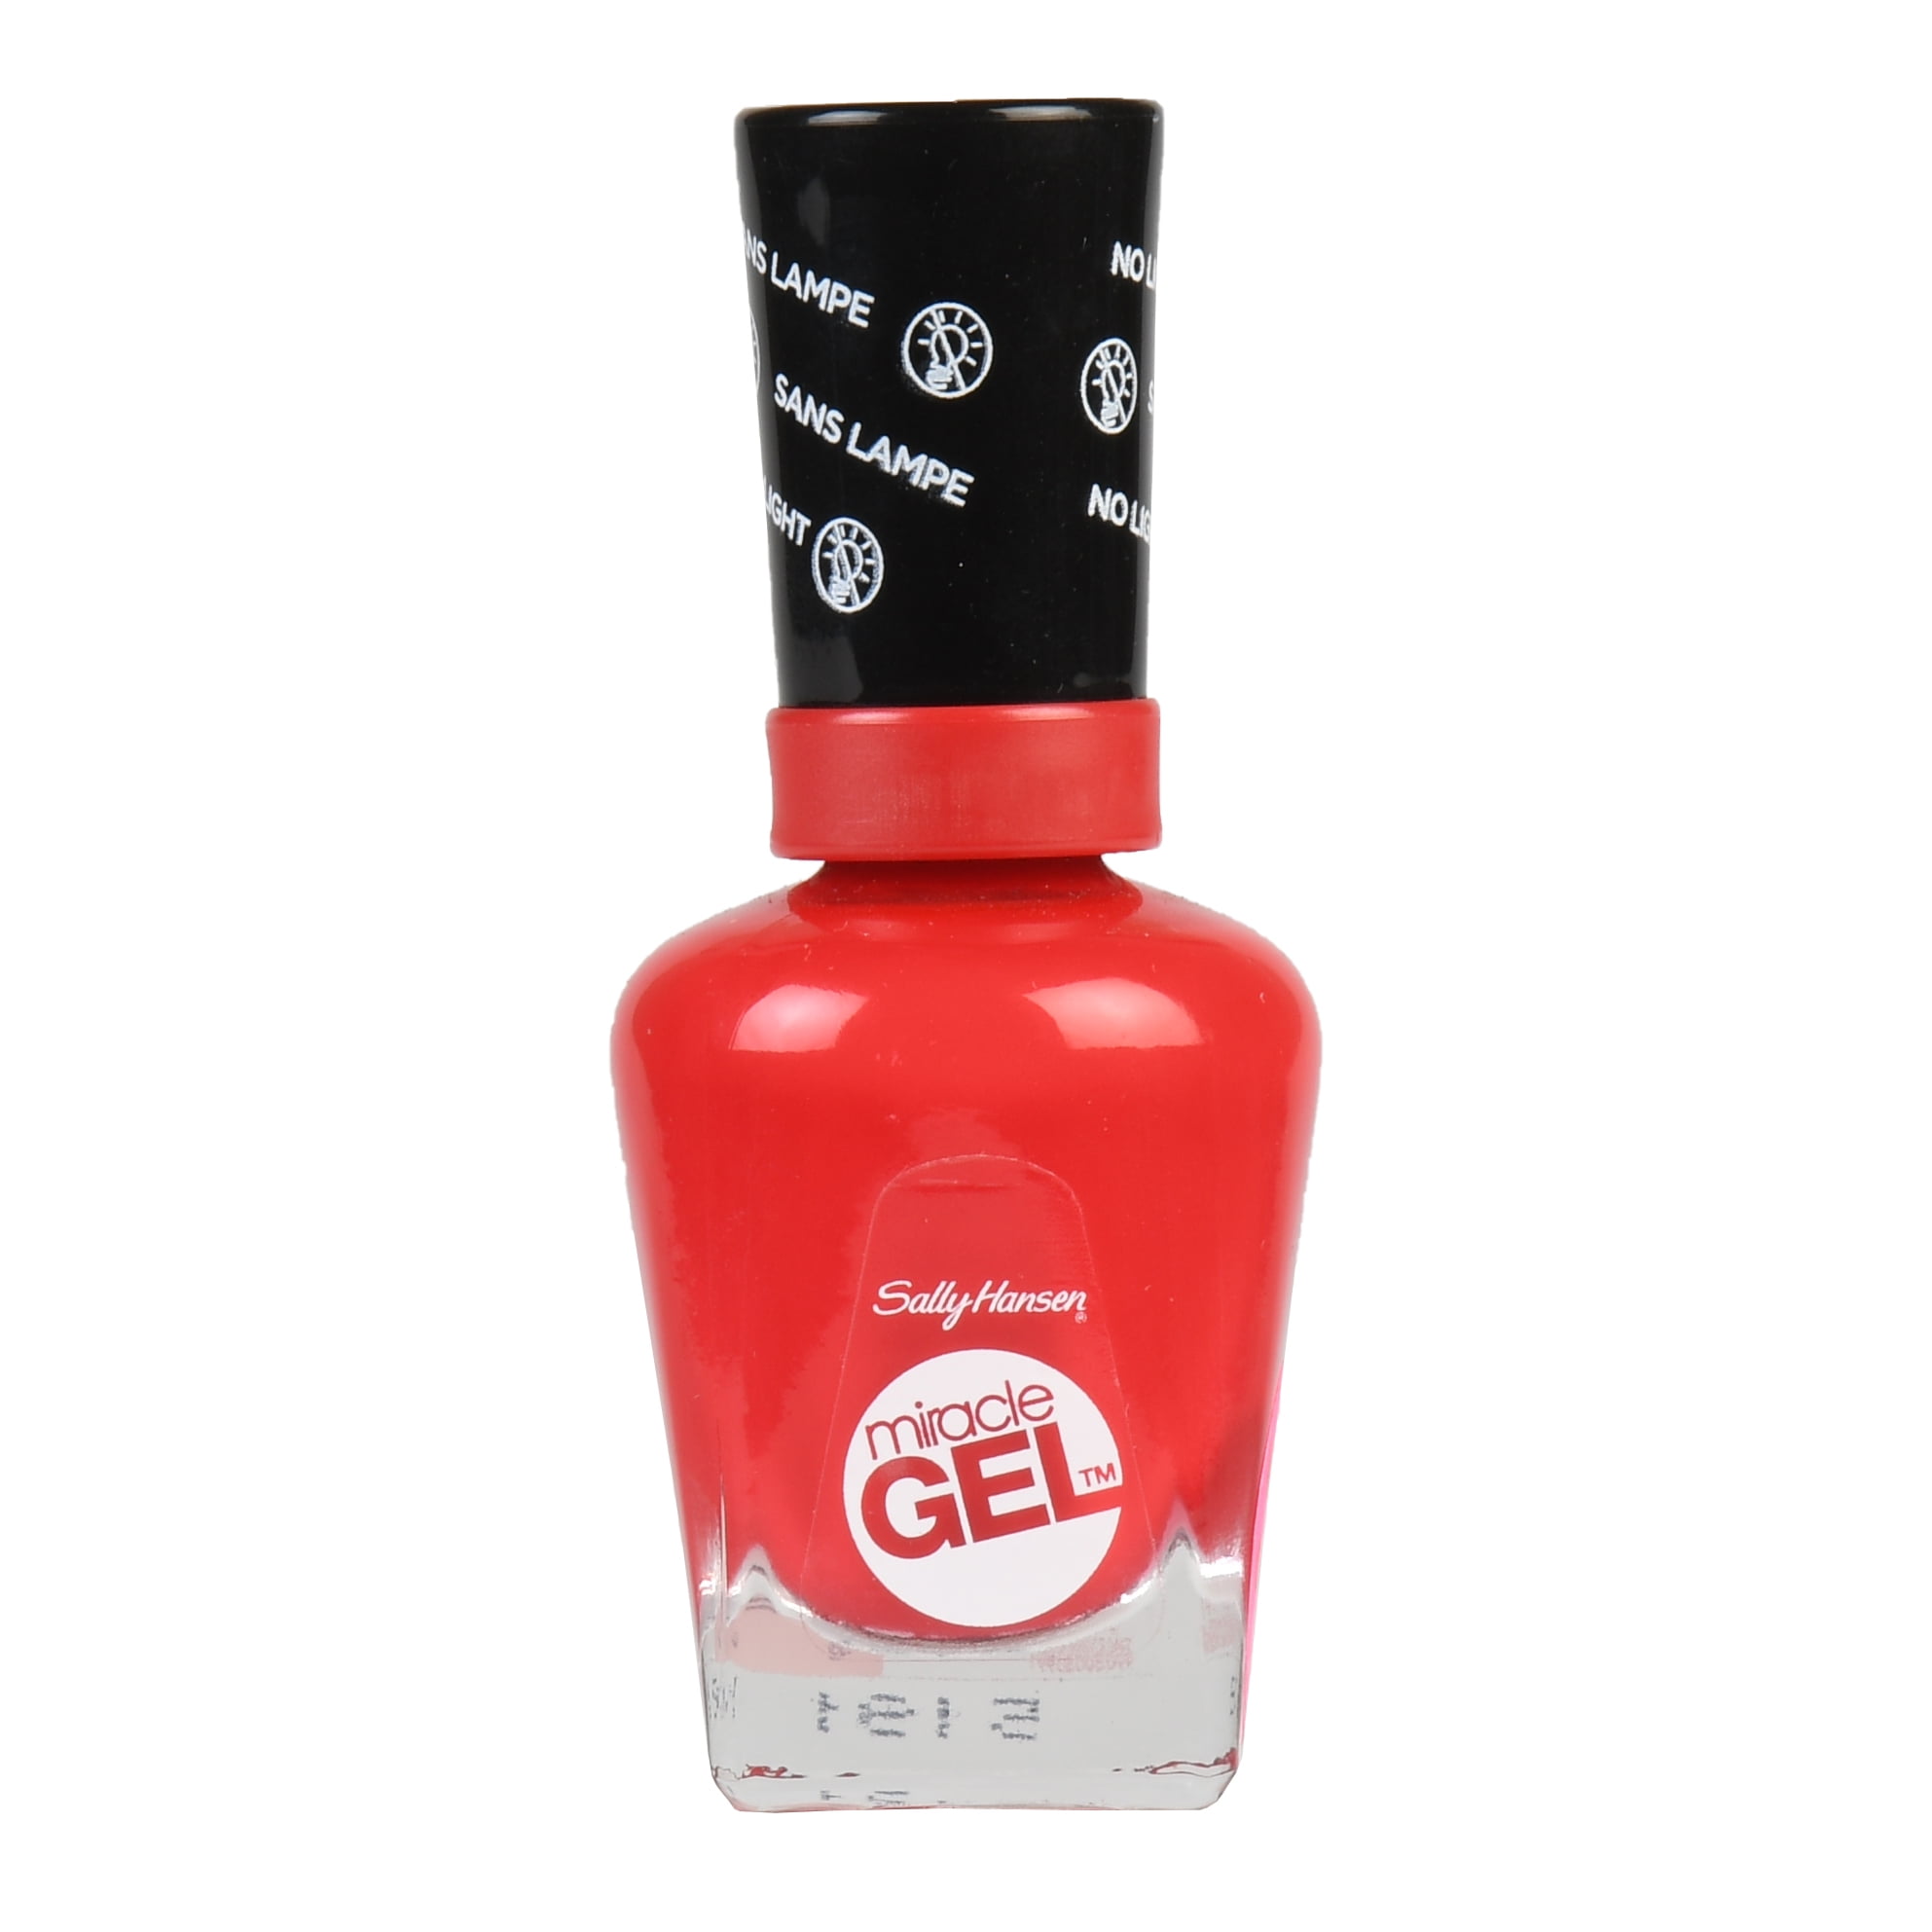 Sally Hansen Miracle Gel Nail Color, Red Eye, 0.5 oz, At Home Gel Nail Polish, Gel Nail Polish, No UV Lamp Needed, Long Lasting, Chip Resistant